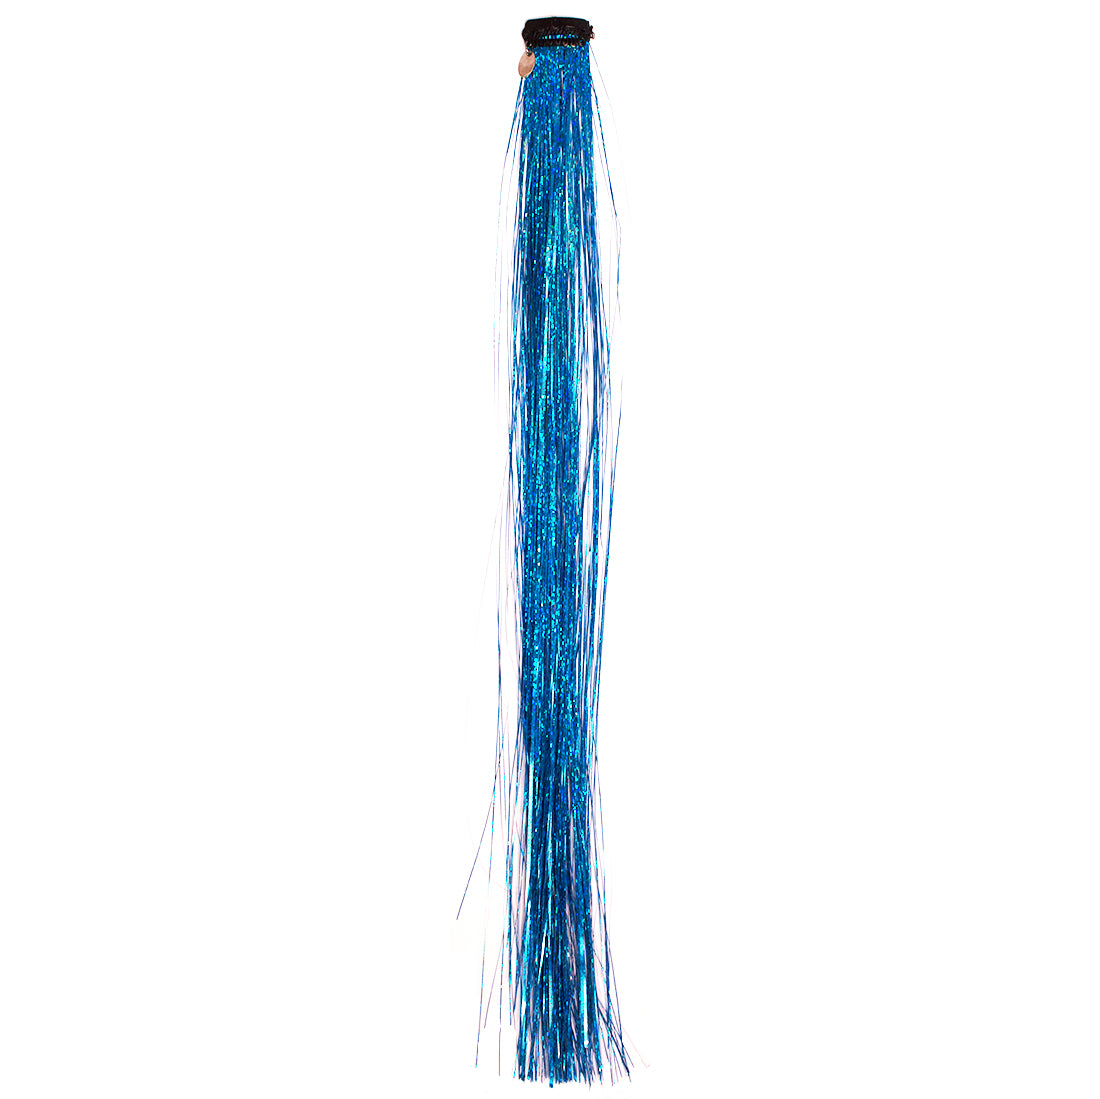 Mia® Clip-n-Bling® sparkly tinsel on a weft clip - hair accessory - blue color - Invented by #MiaKaminski of #MiaBeauty